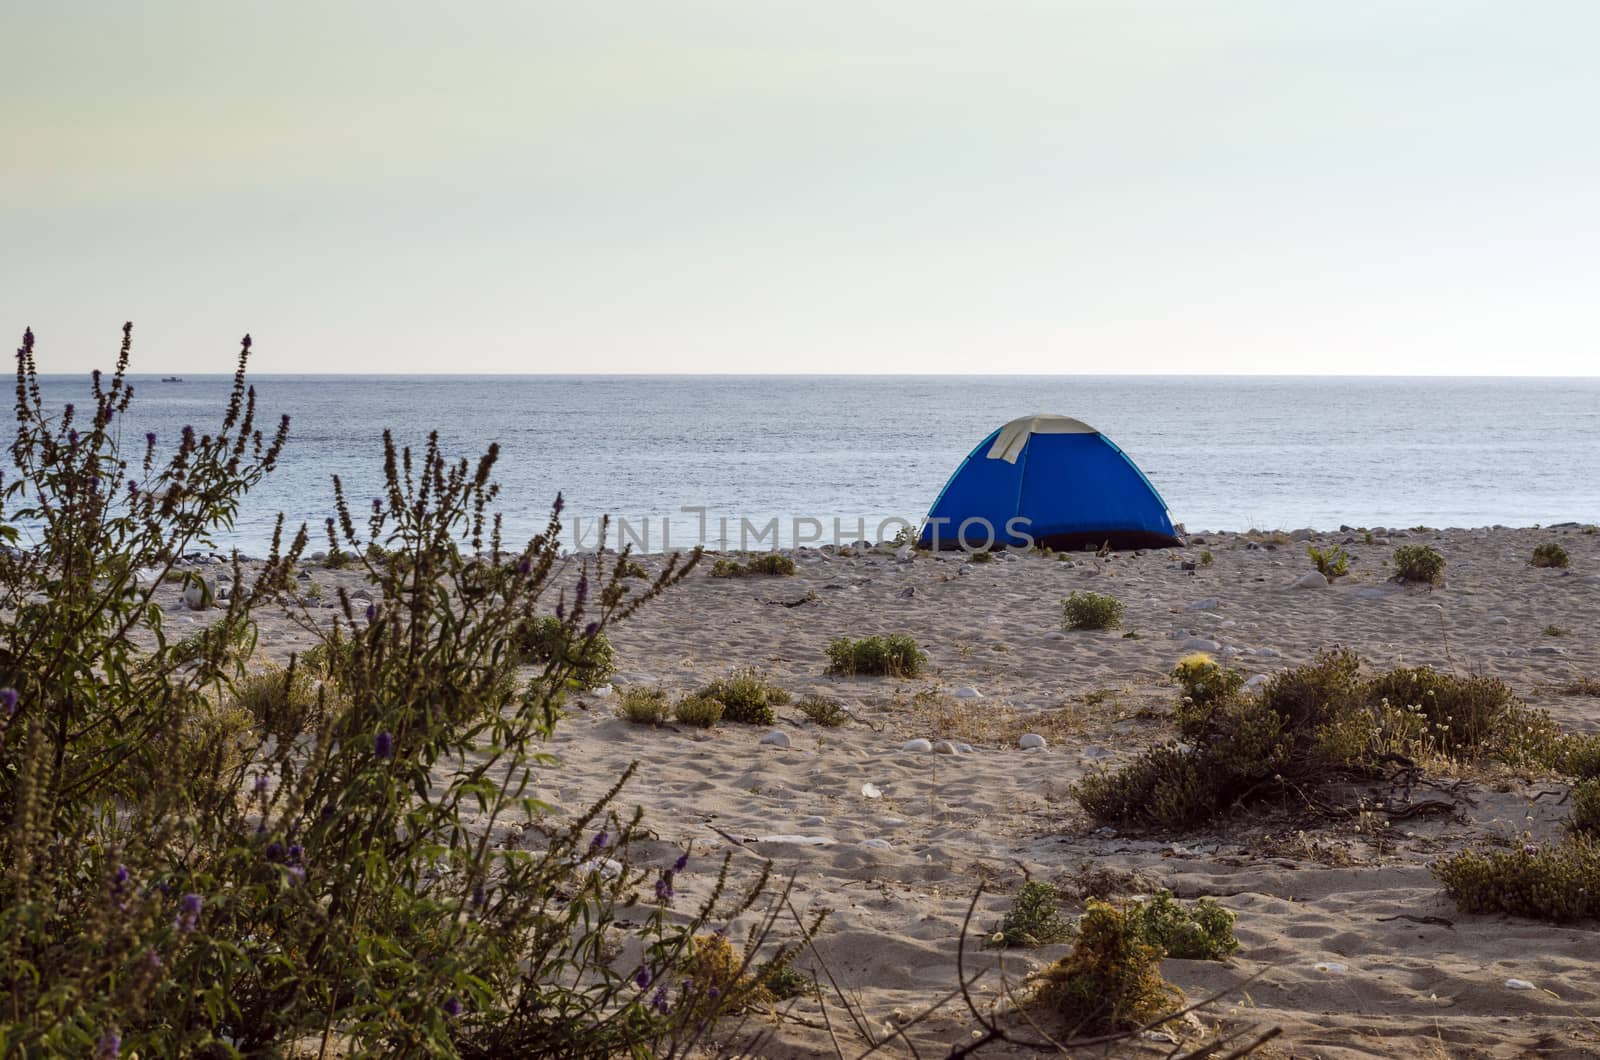 Tent on a beach by Anzemulec